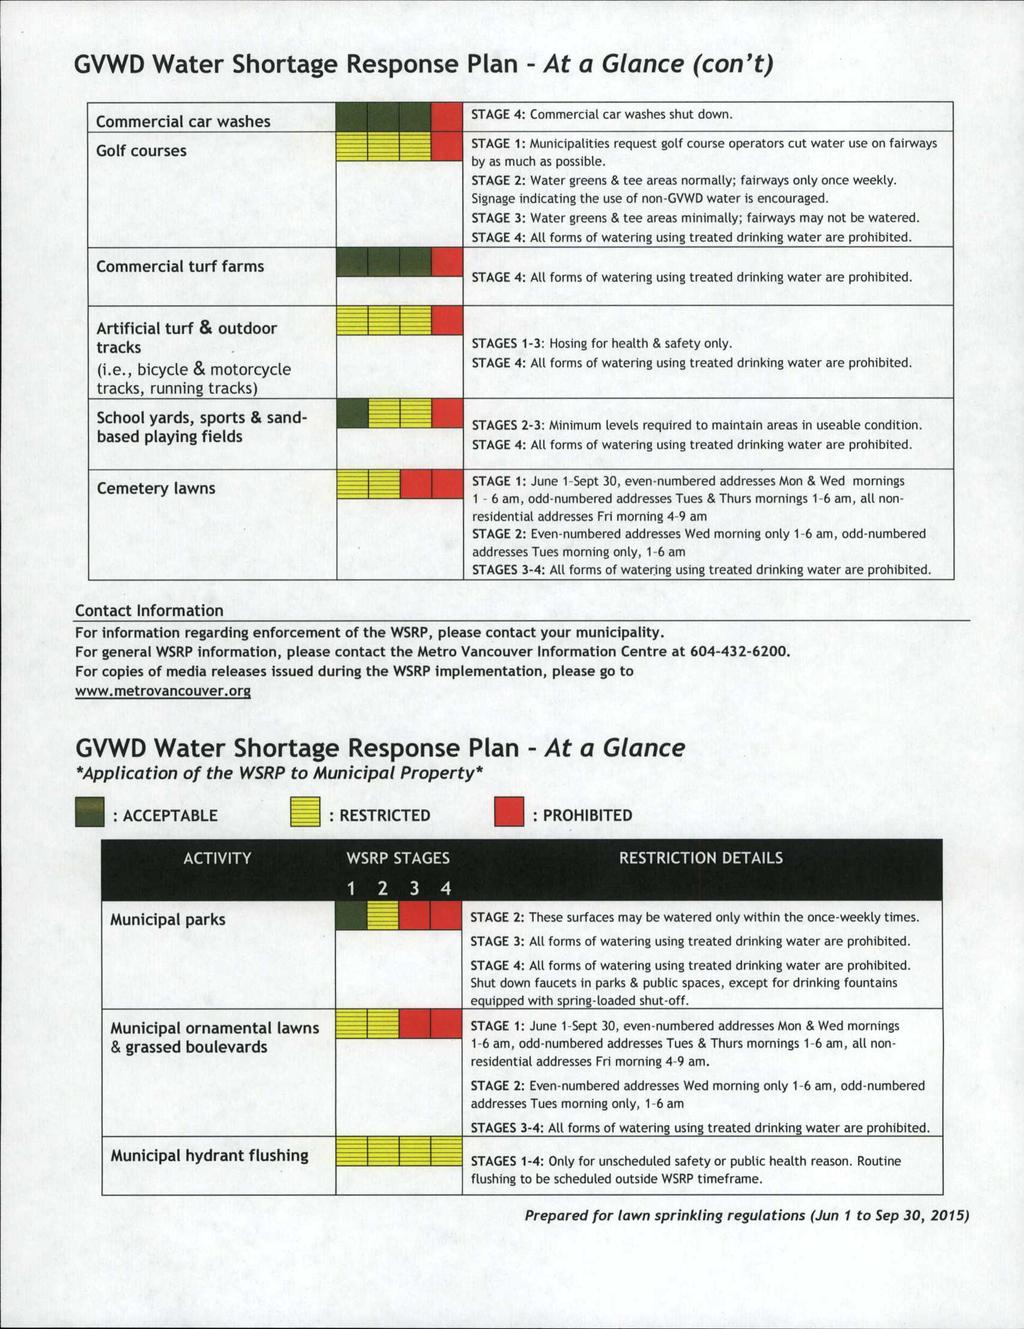 GVWD Water Shortage Response Plan - At a Glance (con't) STAGE 4: Commercal car washes shut down. STAGE : Muncpaltes request golf course operators cut water use on farways by as much as possble.